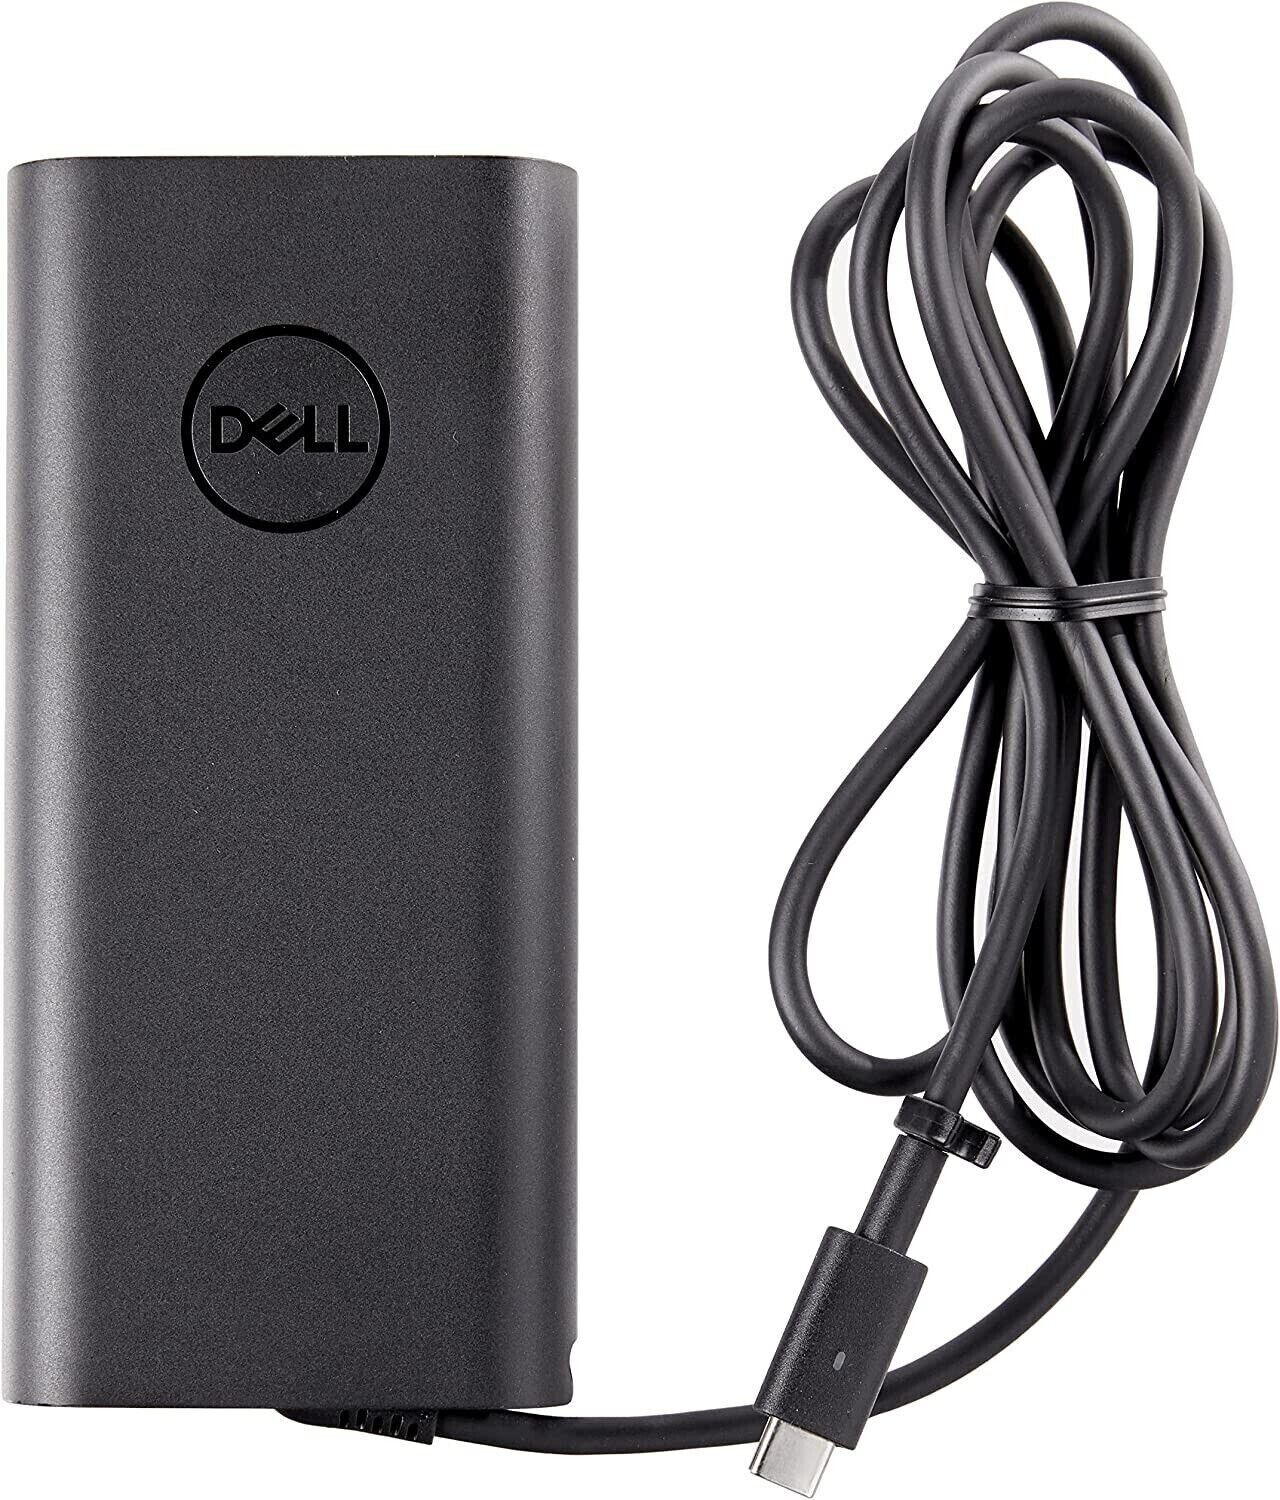 Genuine 130W USB-C Type-C Charger For Dell XPS 15 2in1 9575 Precision 5530 2in1